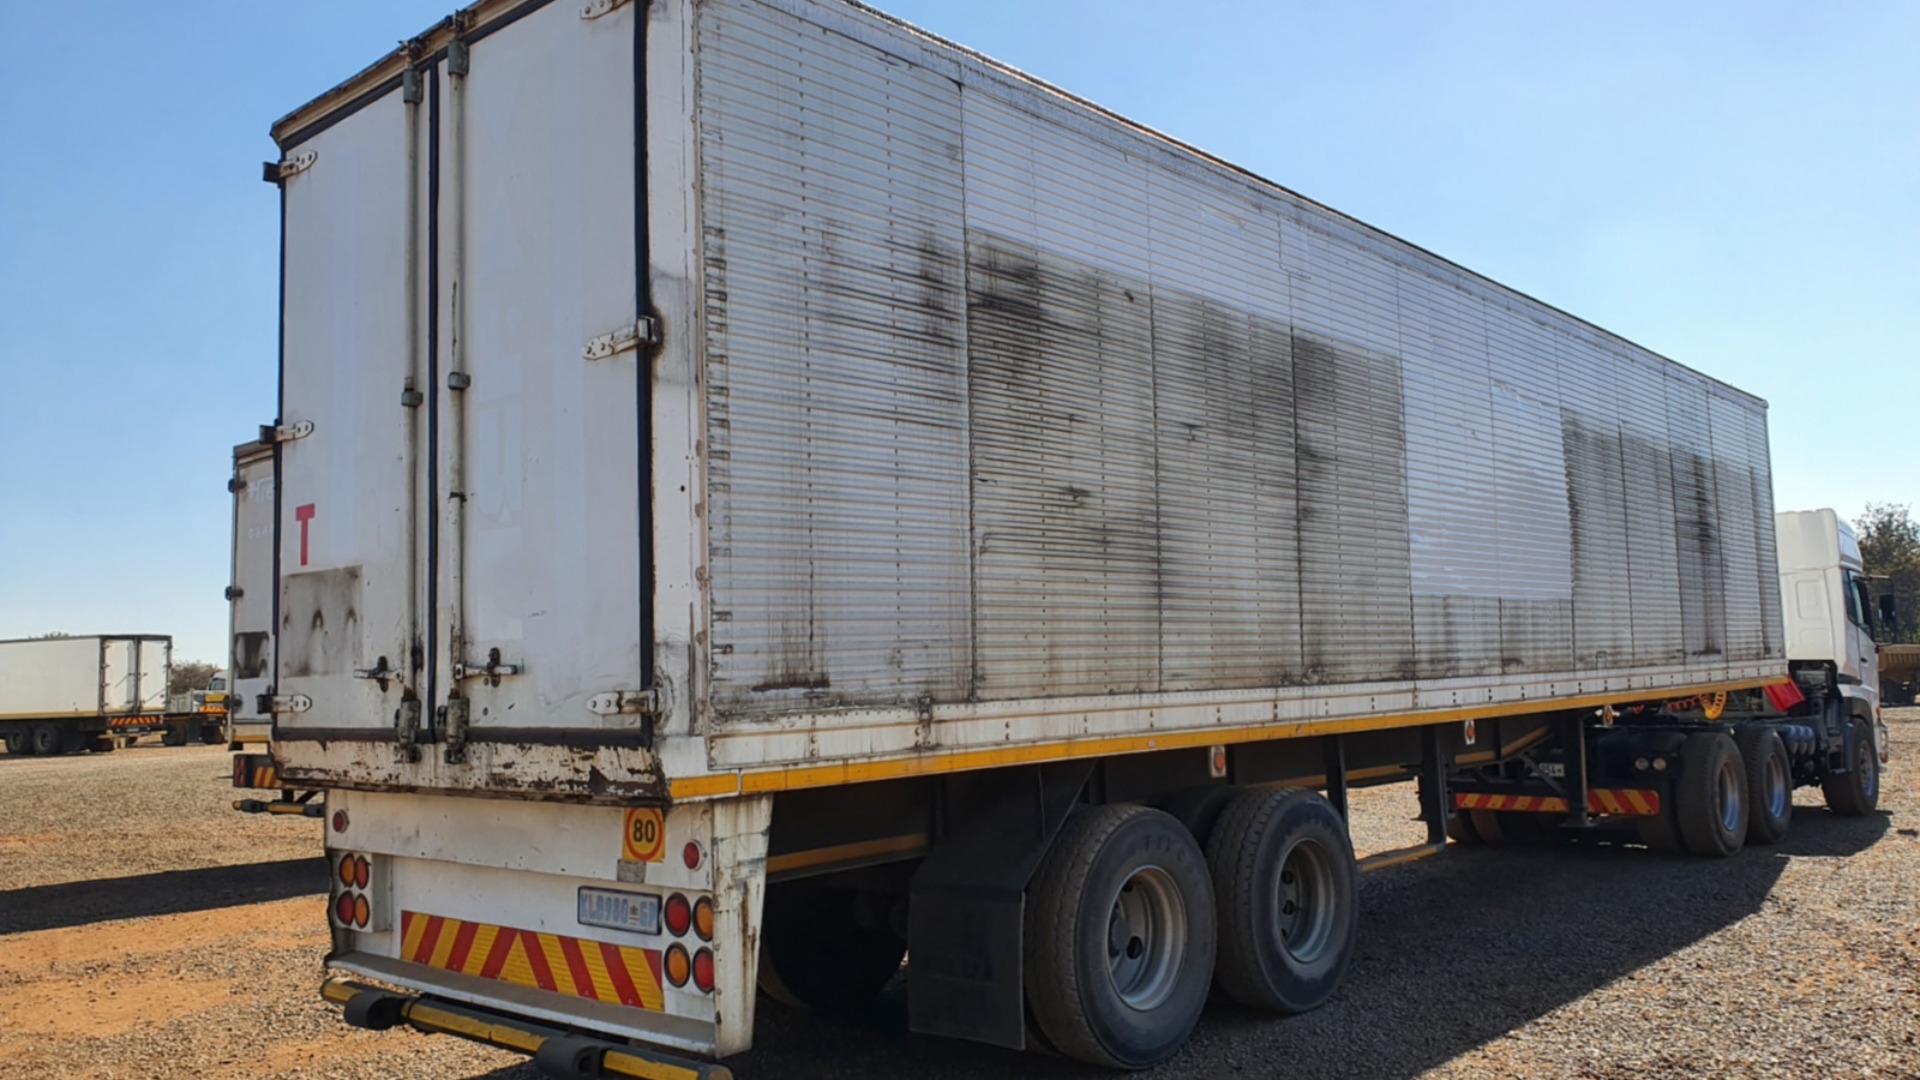 Box trailer CTS DOUBLE AXLE VOLUME BODY TRAILER 1992 for sale by WCT Auctions Pty Ltd  | Truck & Trailer Marketplaces